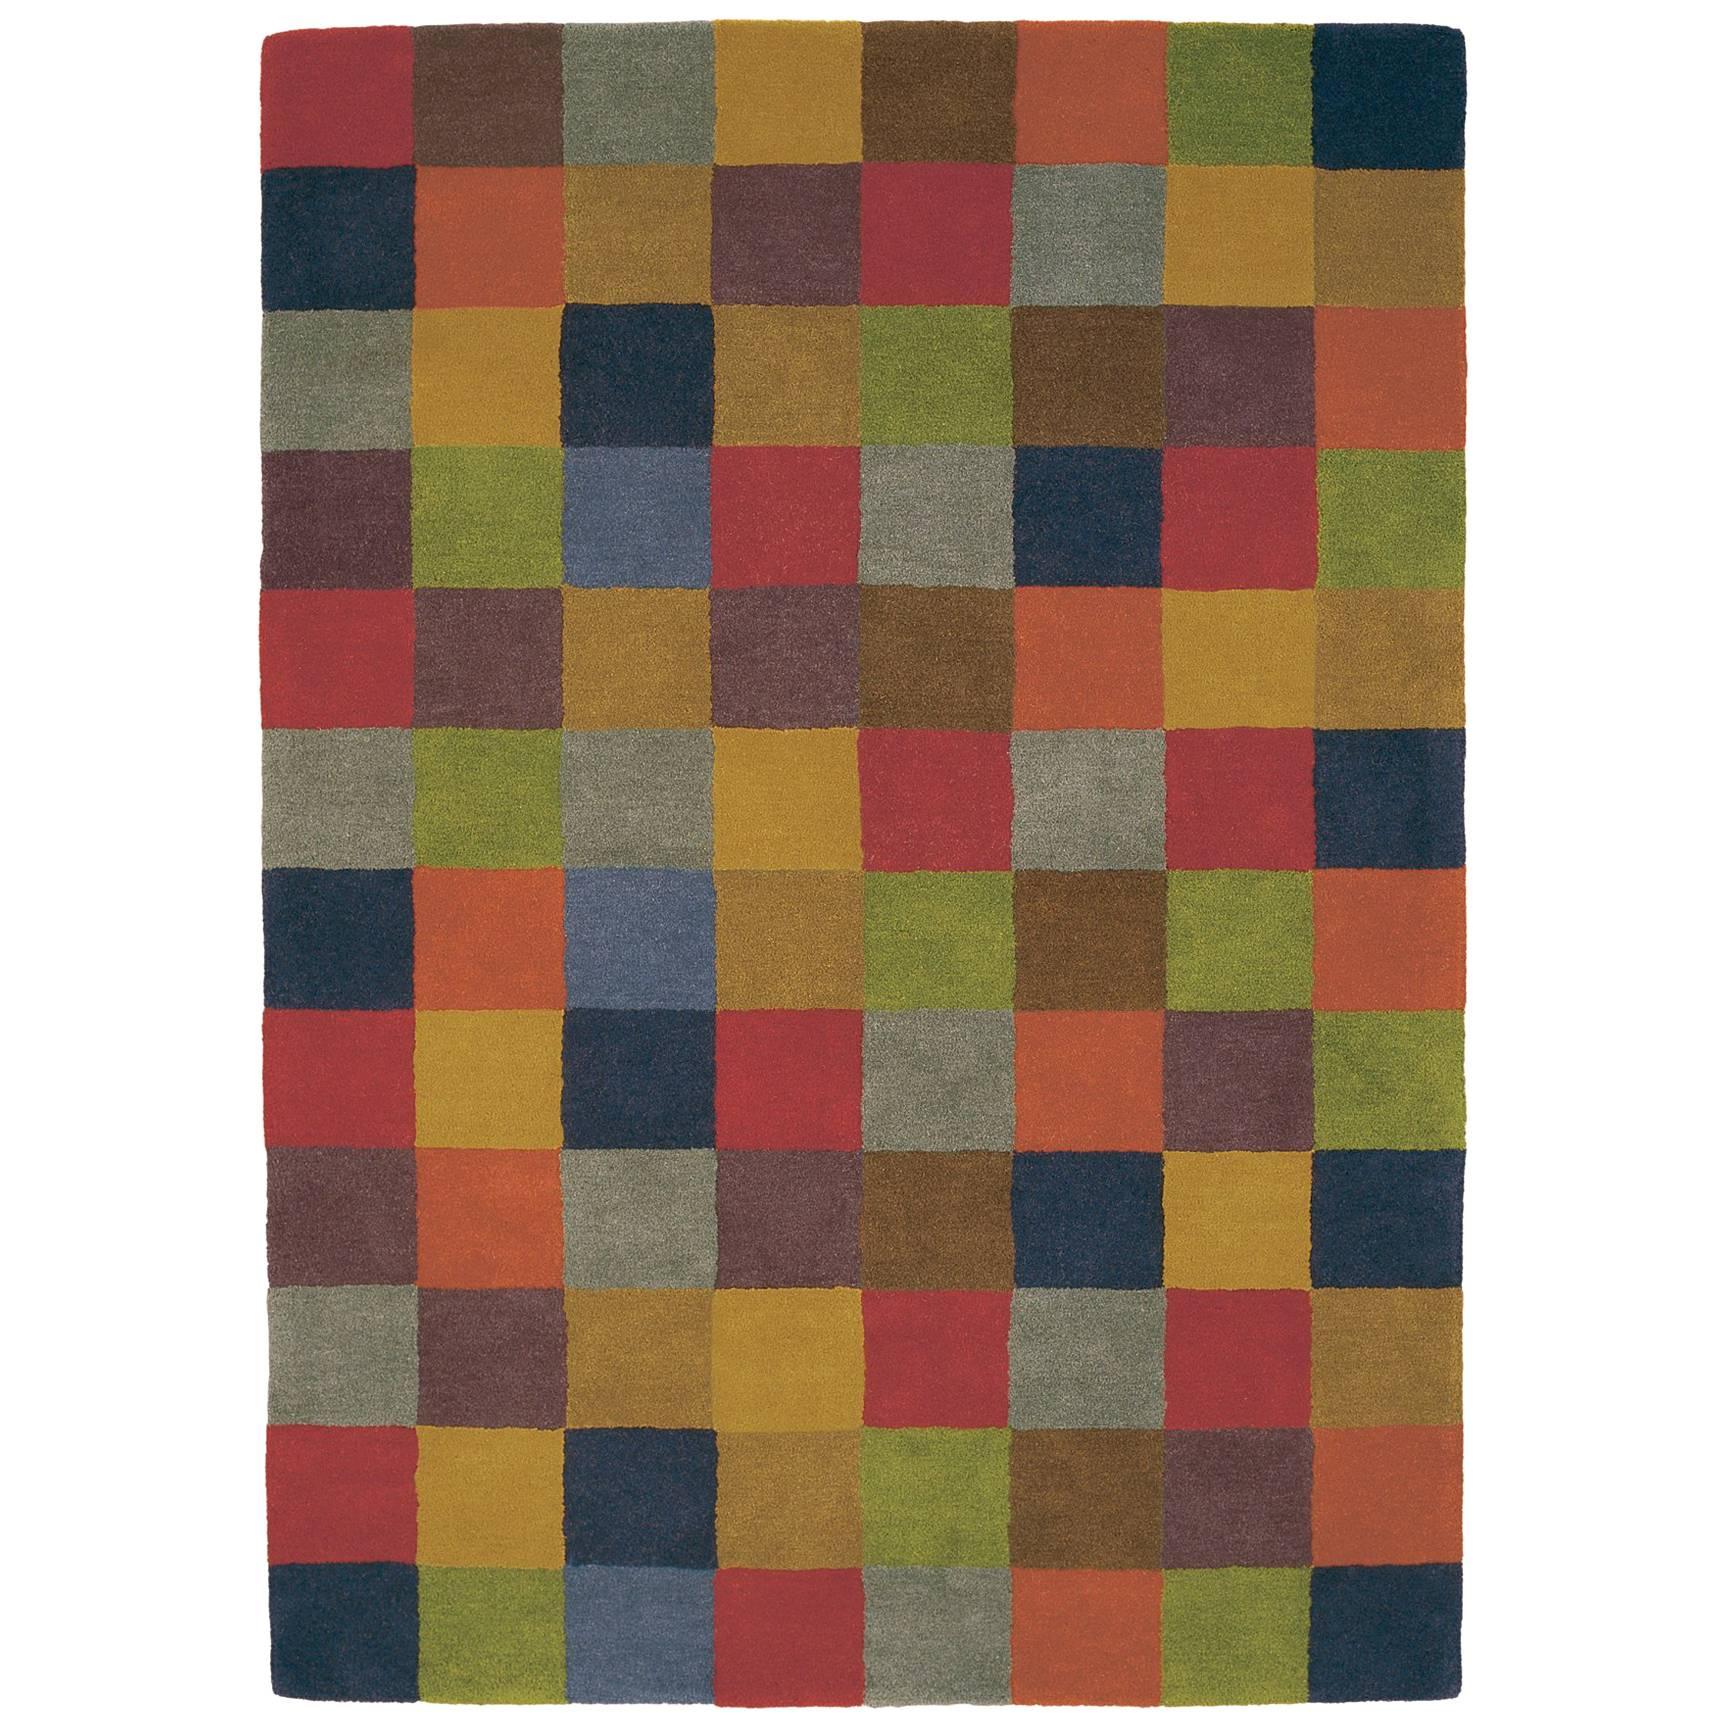 Hand-Tufted Cuadros 1996 Multicolored Rug by Nani Marquina, Standard